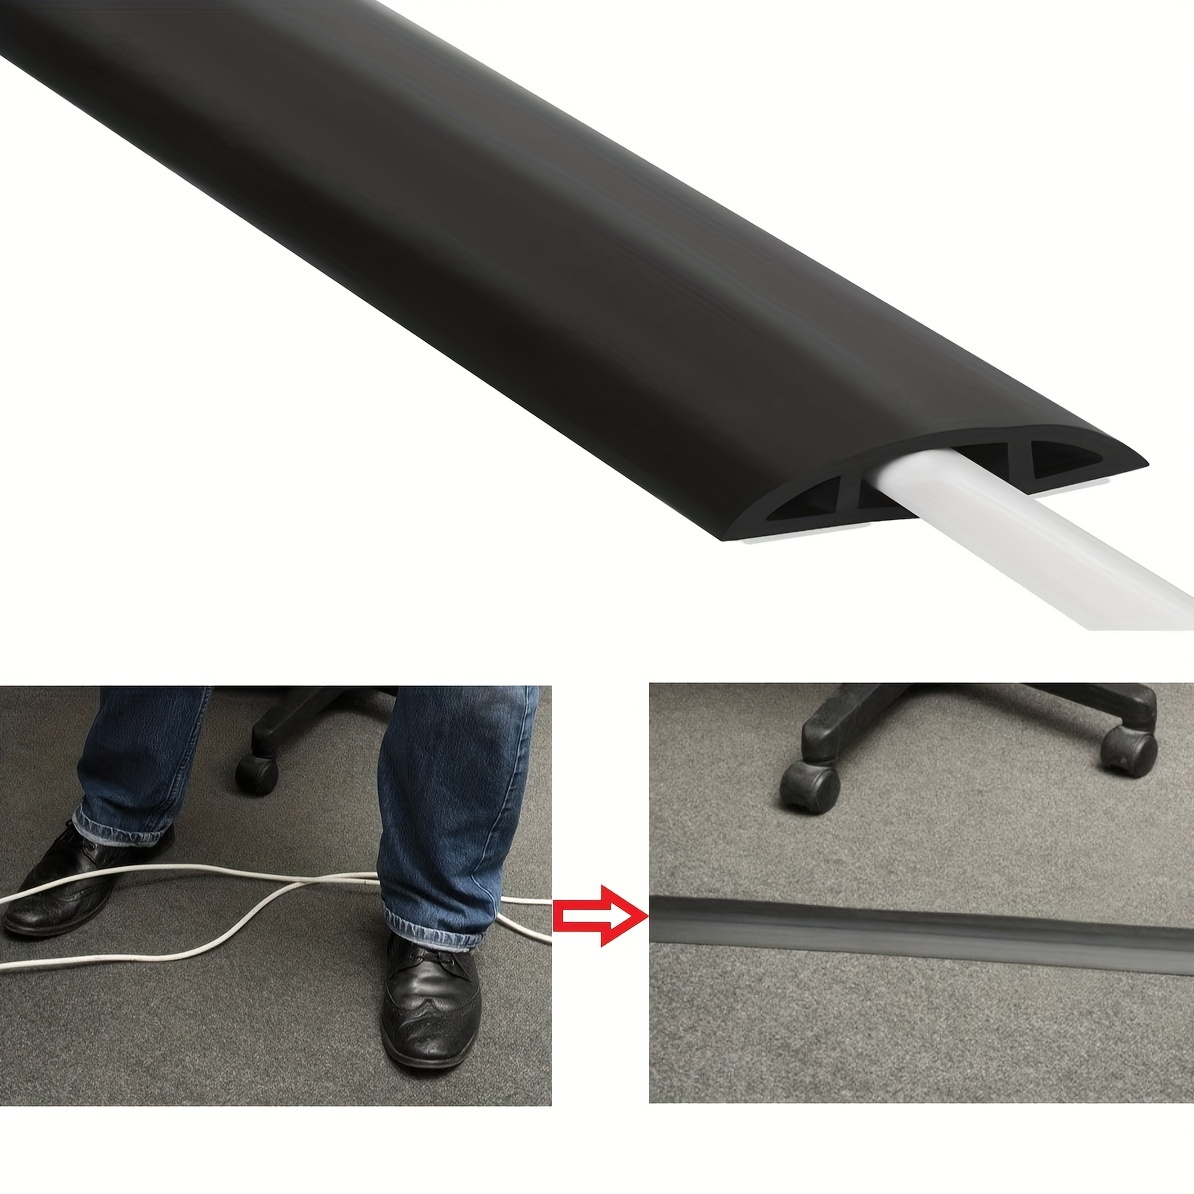 Bates- Floor Cord Cover, 6ft Cable Cover, Cord Cover Floor, Cord Protector, Floor  Cable Cover, Cord Hider Floor - Bates Choice